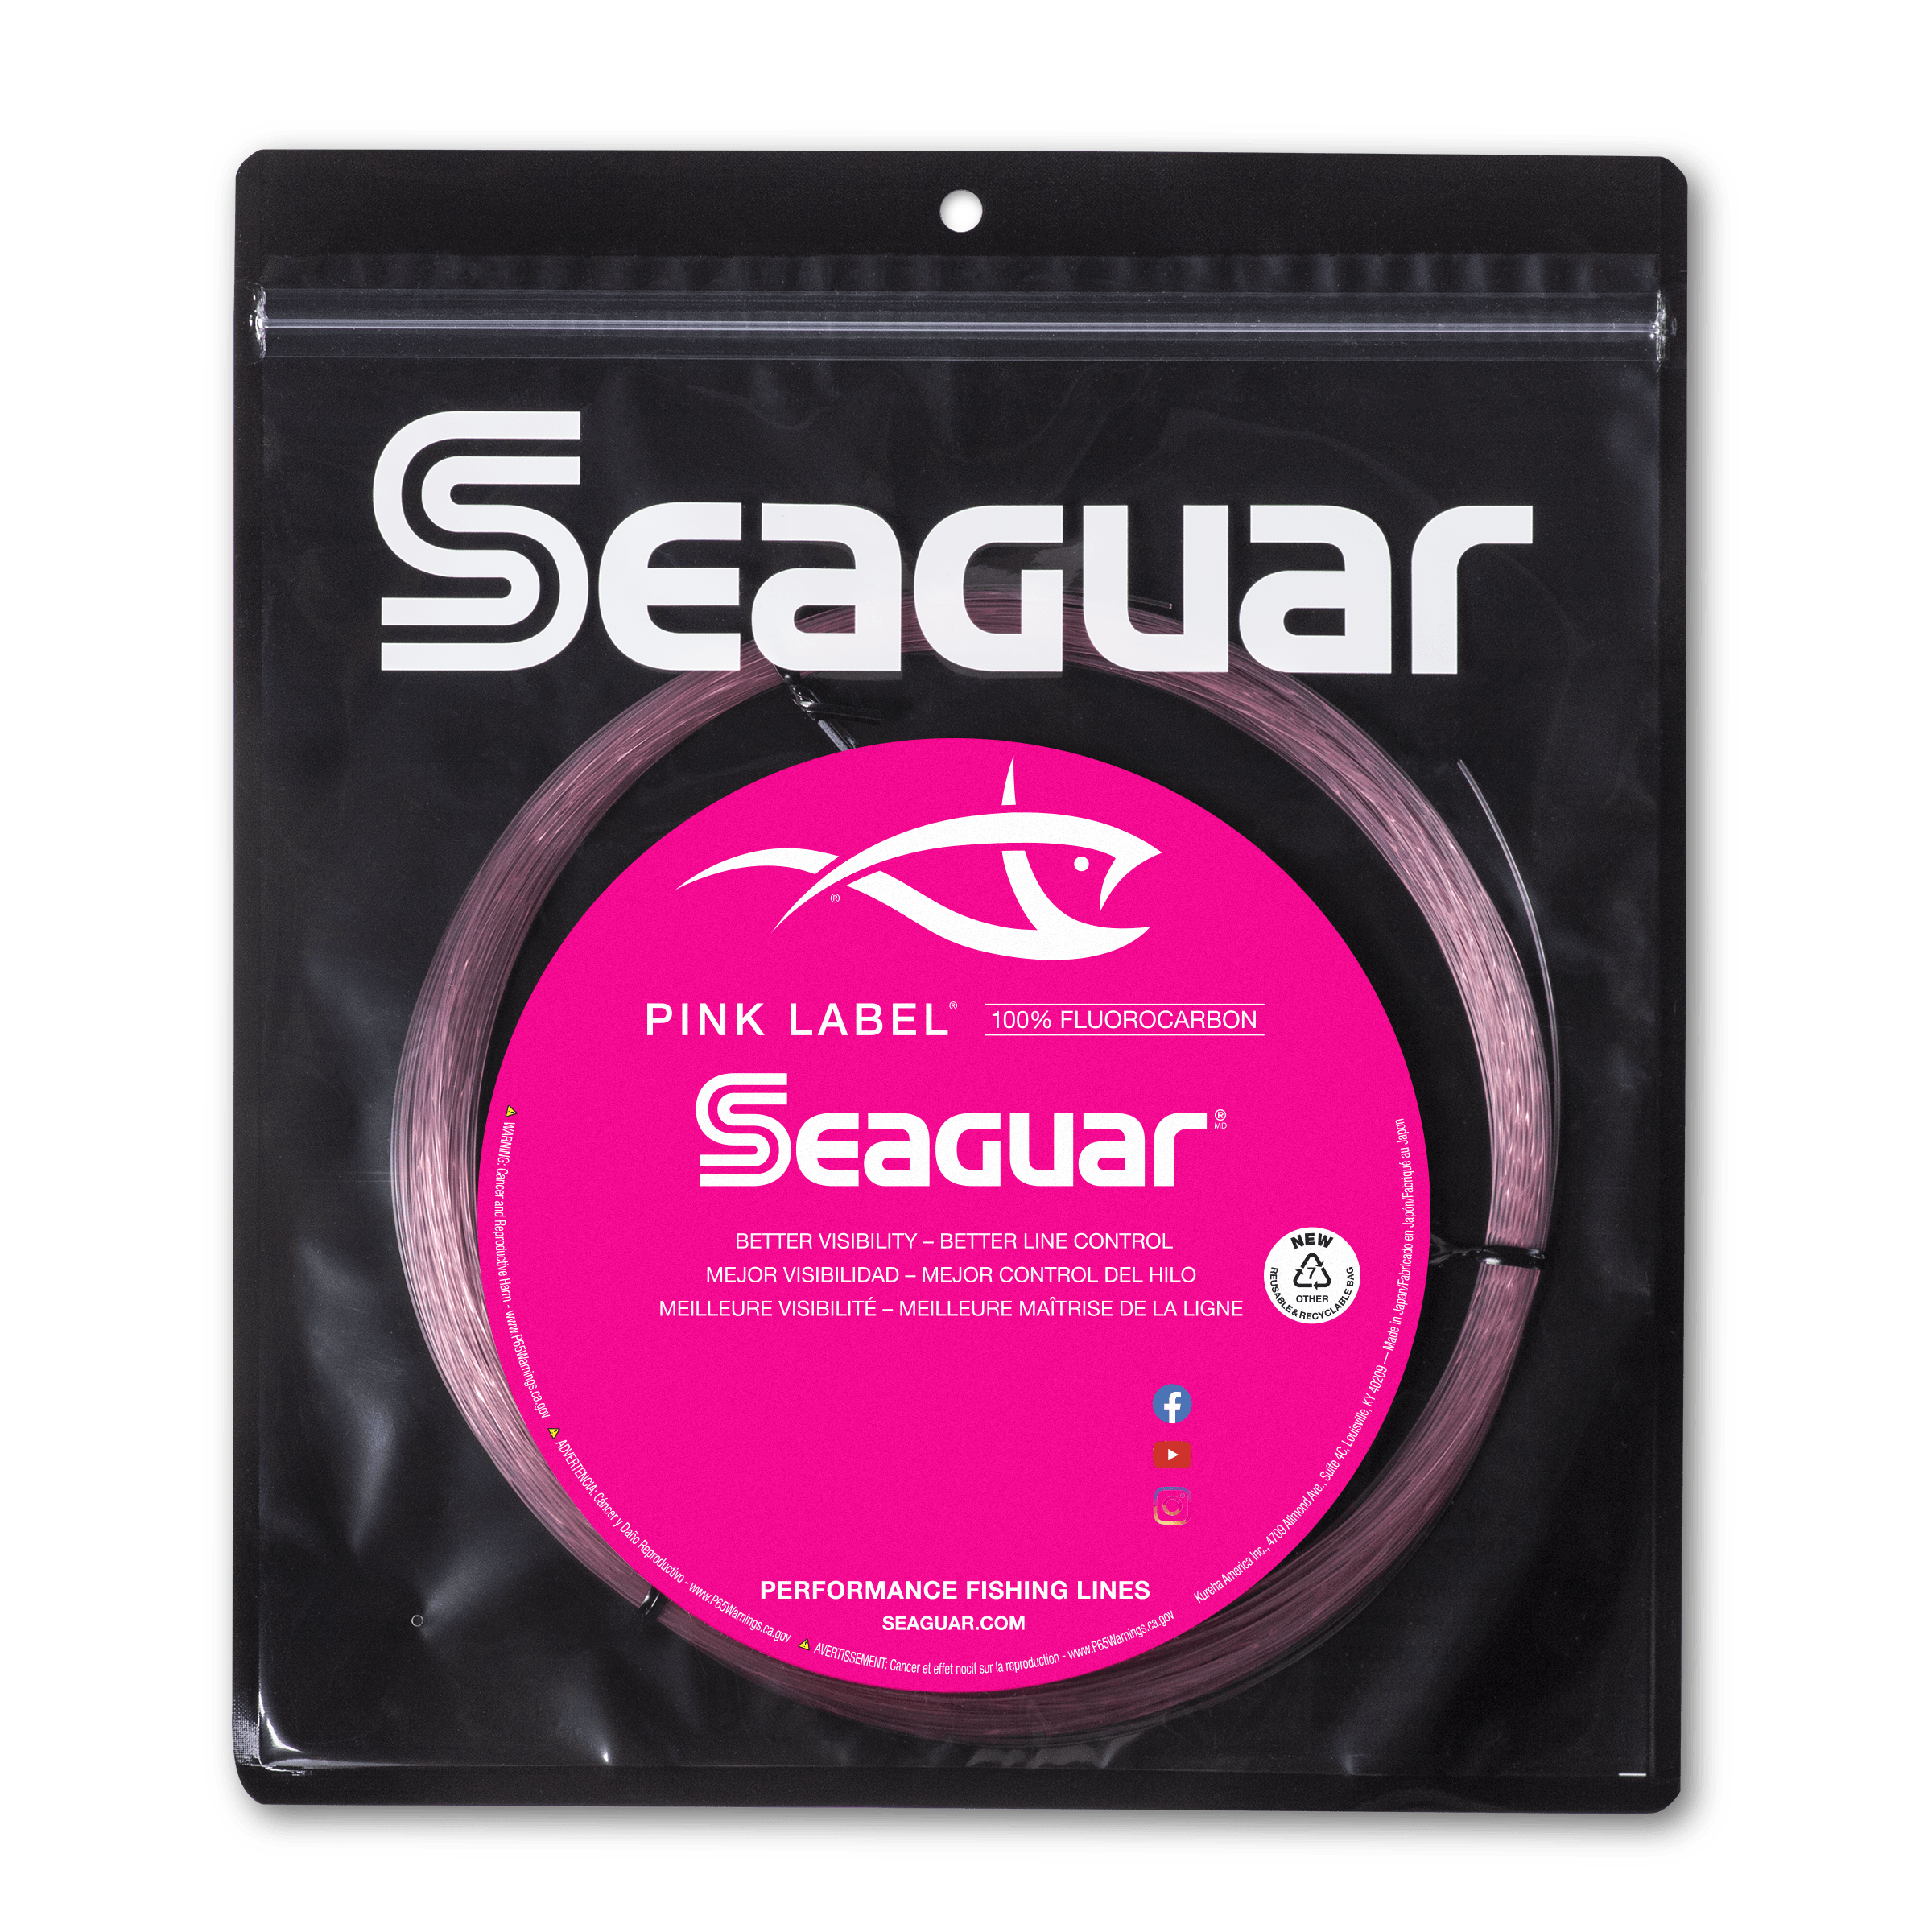  Seaguar Inshore Fluorocarbon Fishing Leader – Strong